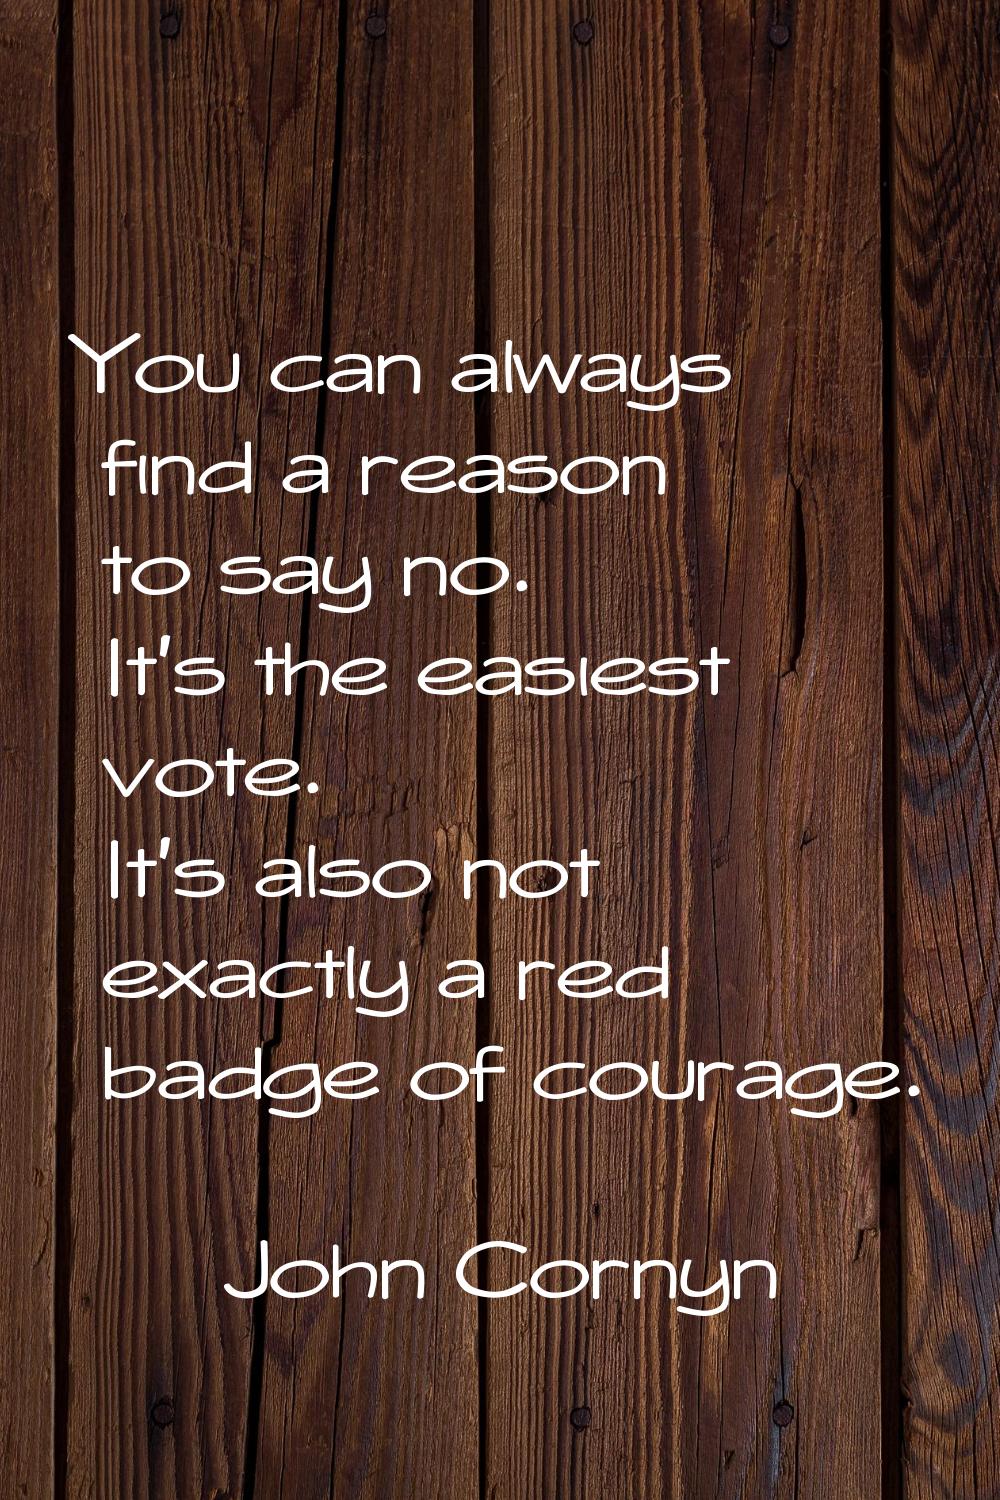 You can always find a reason to say no. It's the easiest vote. It's also not exactly a red badge of